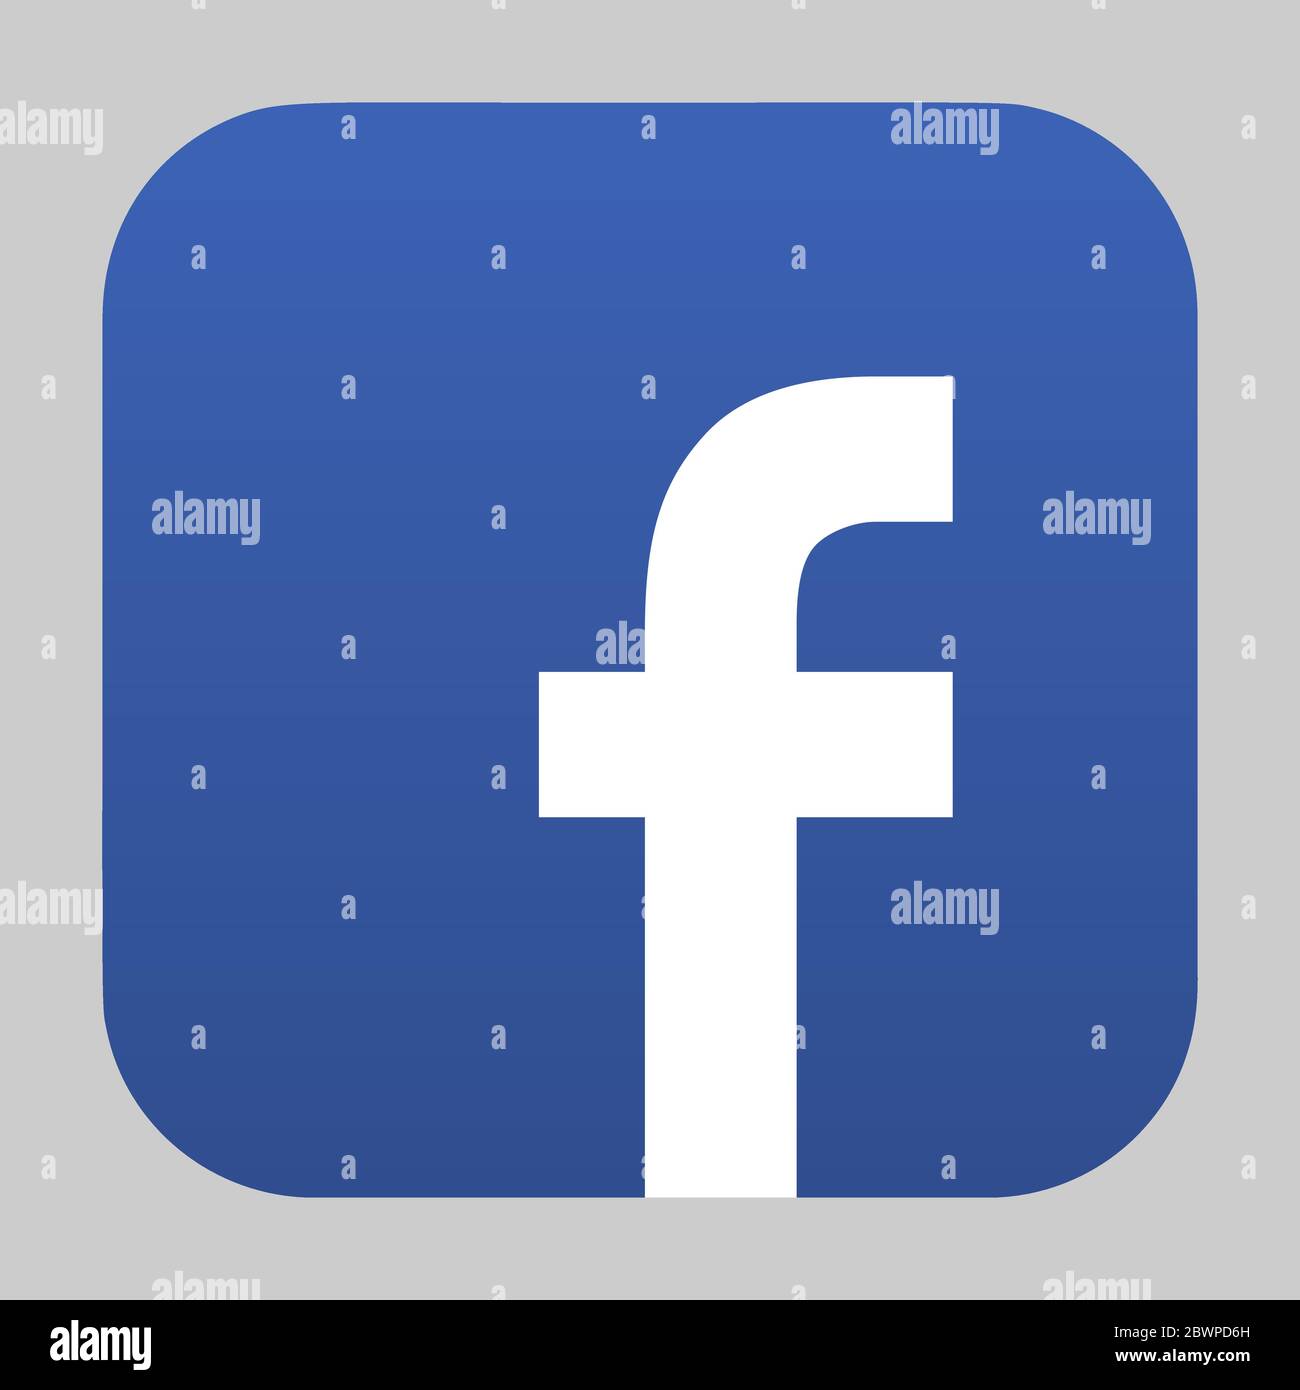 Facebook login web page editorial stock photo. Image of friends - 86207198